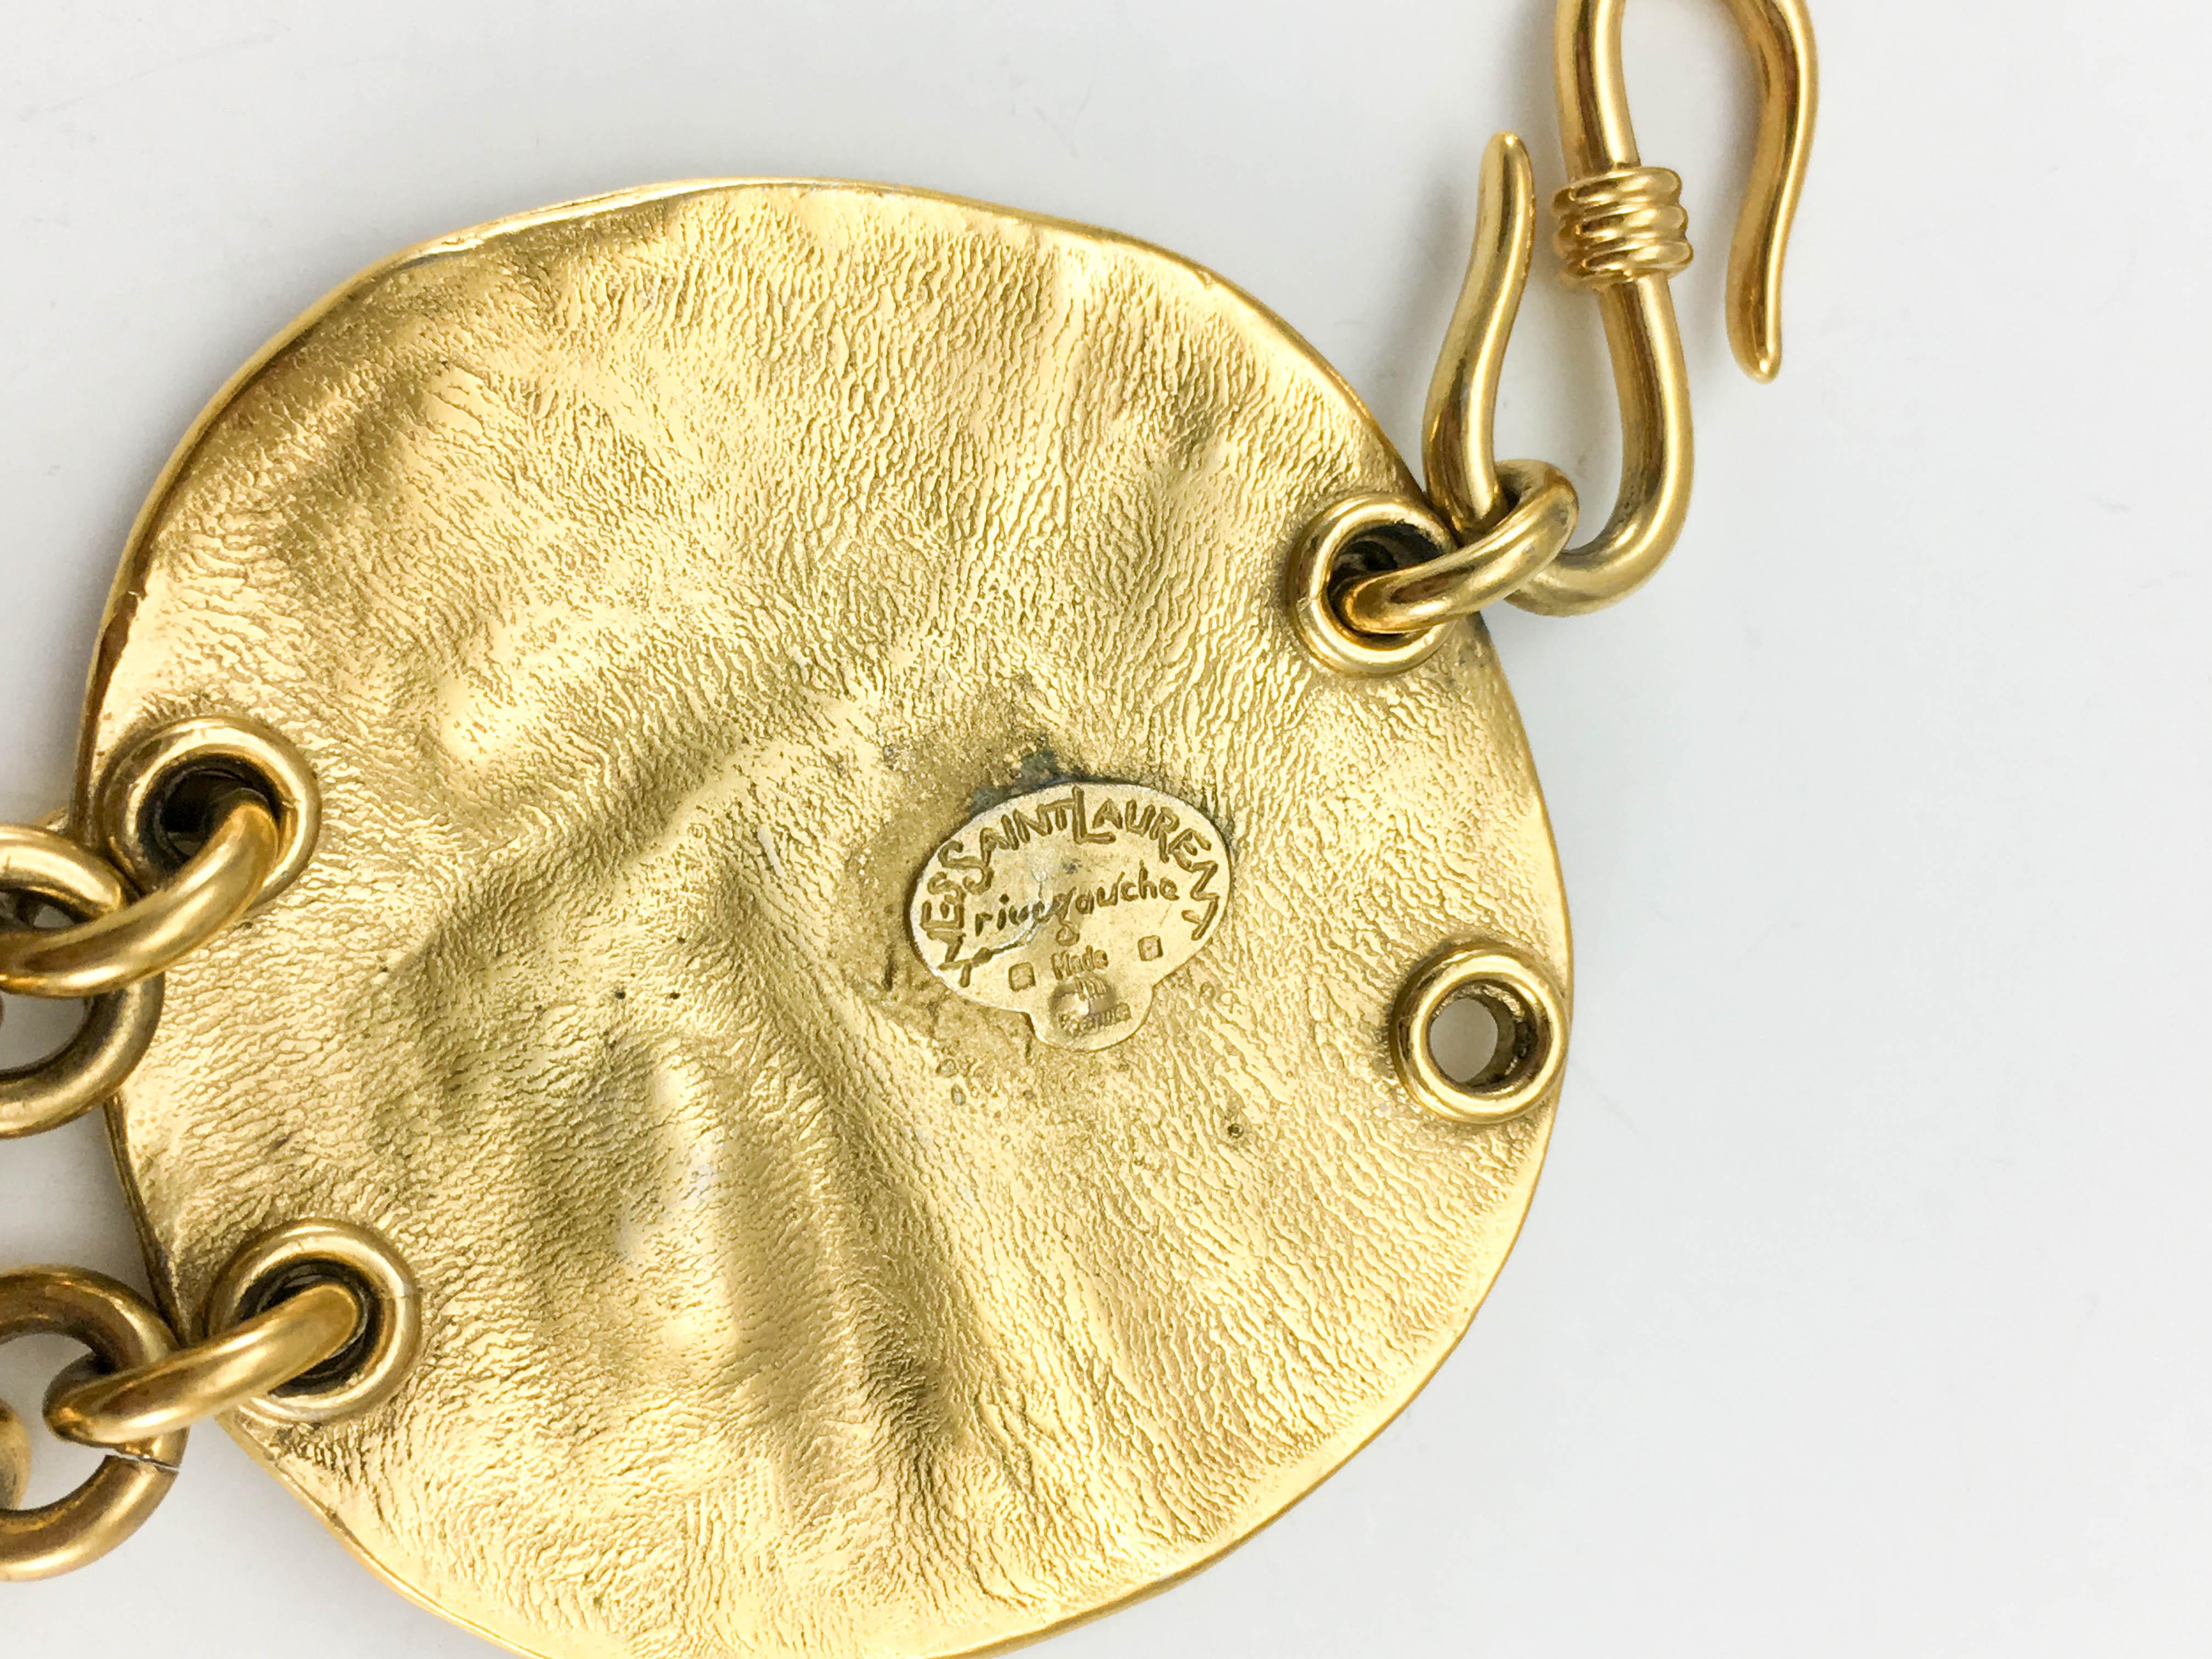 Yves Saint Laurent by Robert Goossens Gold-Plated Disk Necklace, 1989   7